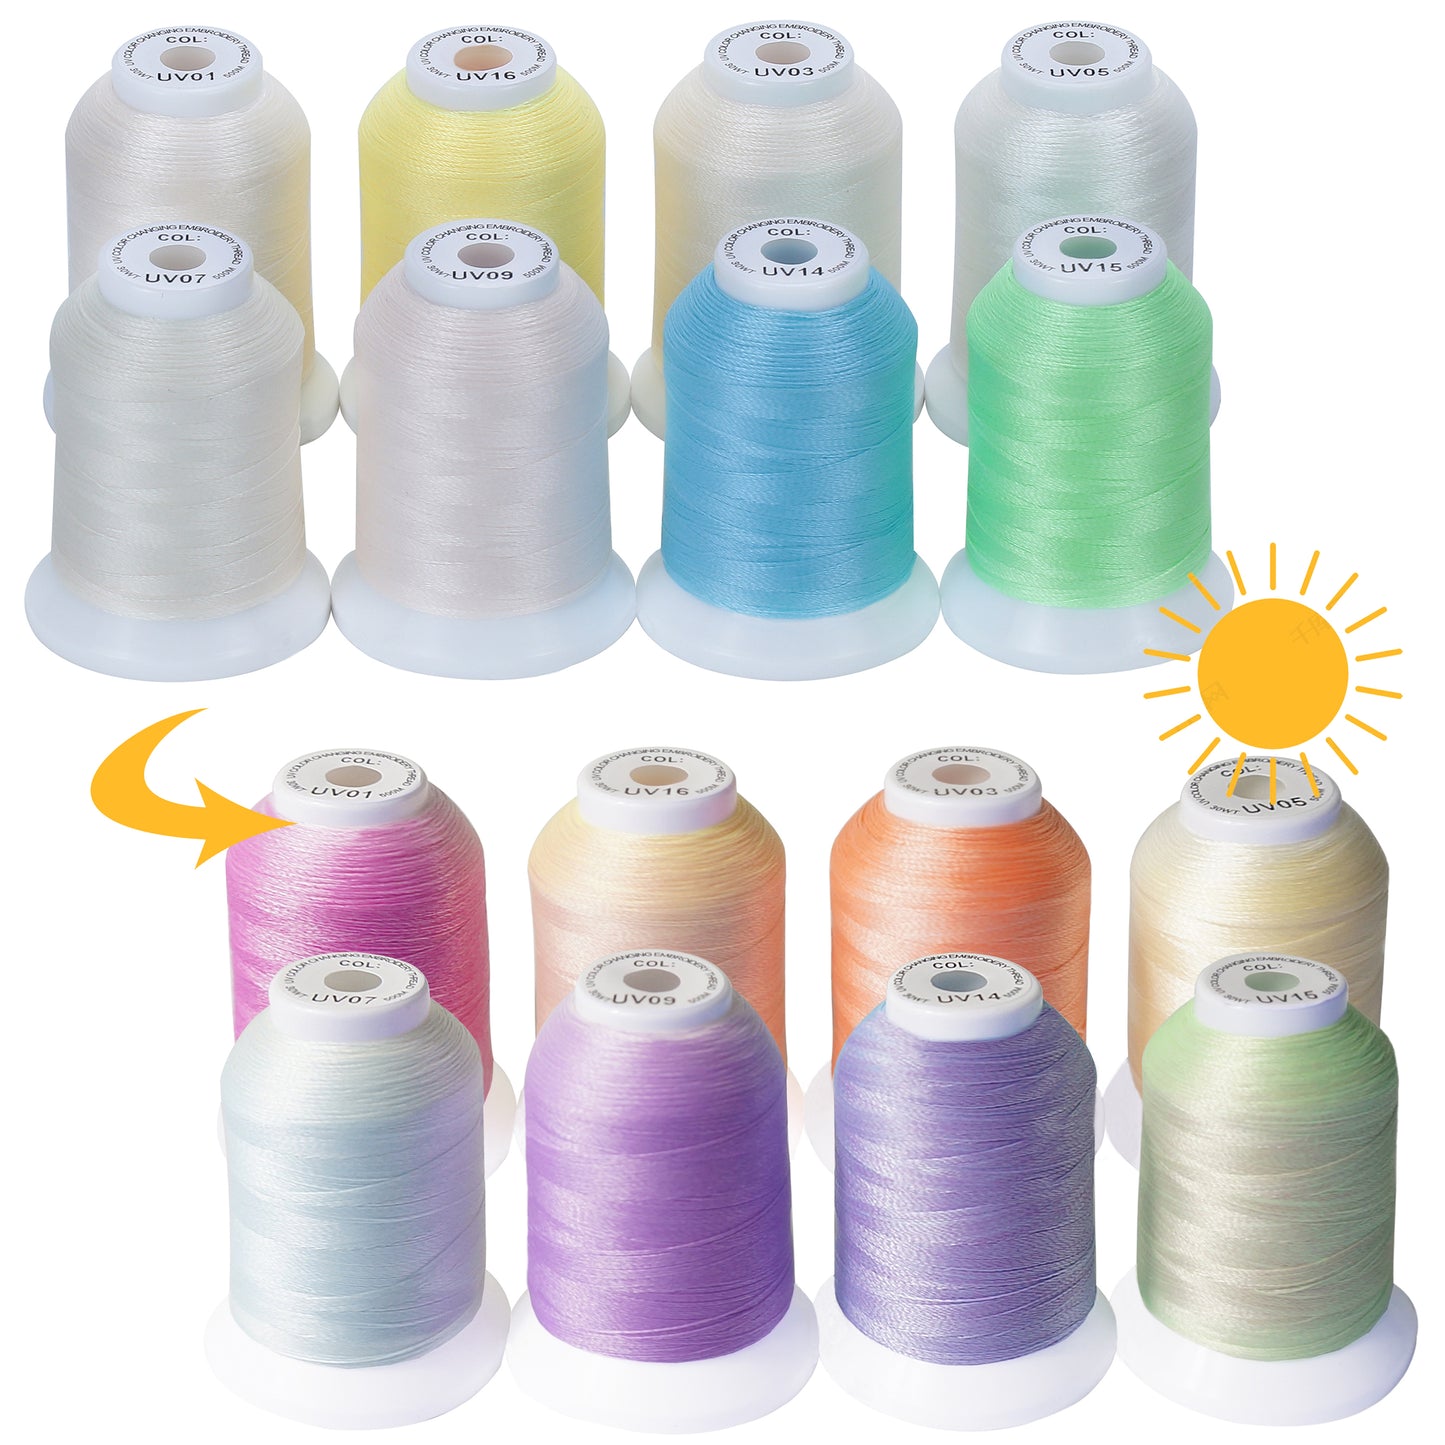 Embroidery Thread Color Options  PMS Thread Colors at Merchology